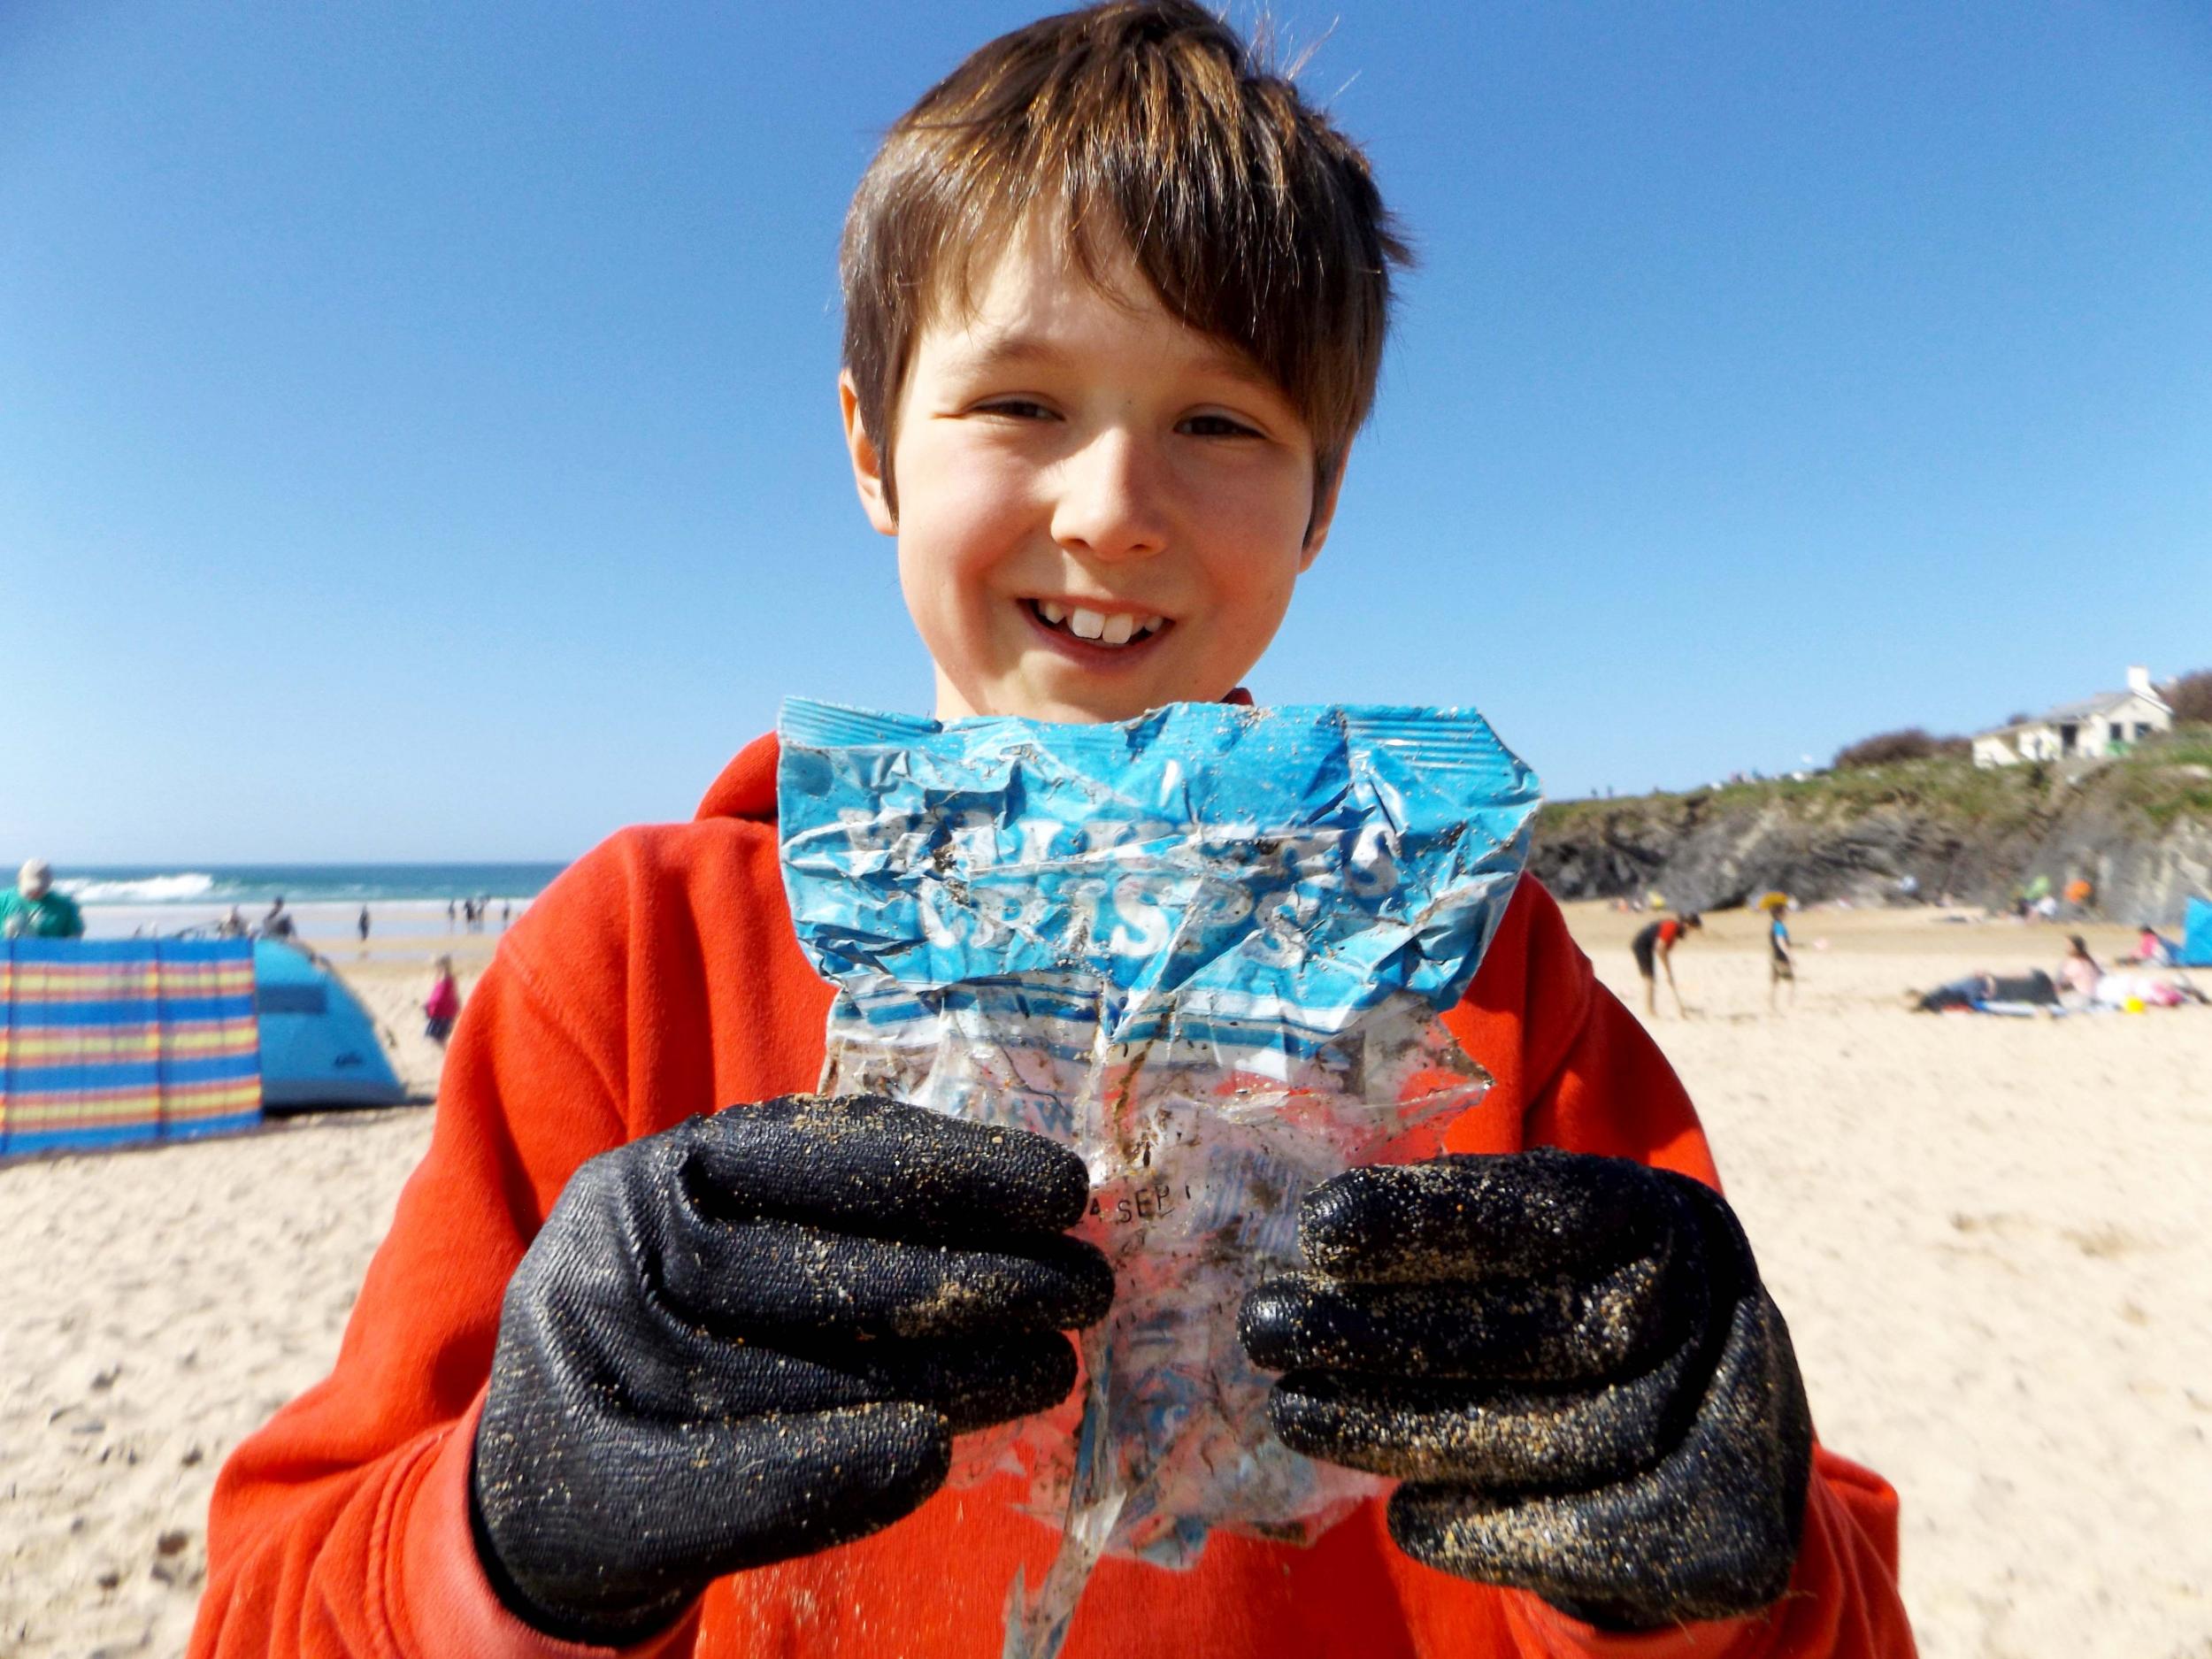 Laurence Miller was part of a group of beach-cleaning volunteers when he found the packet